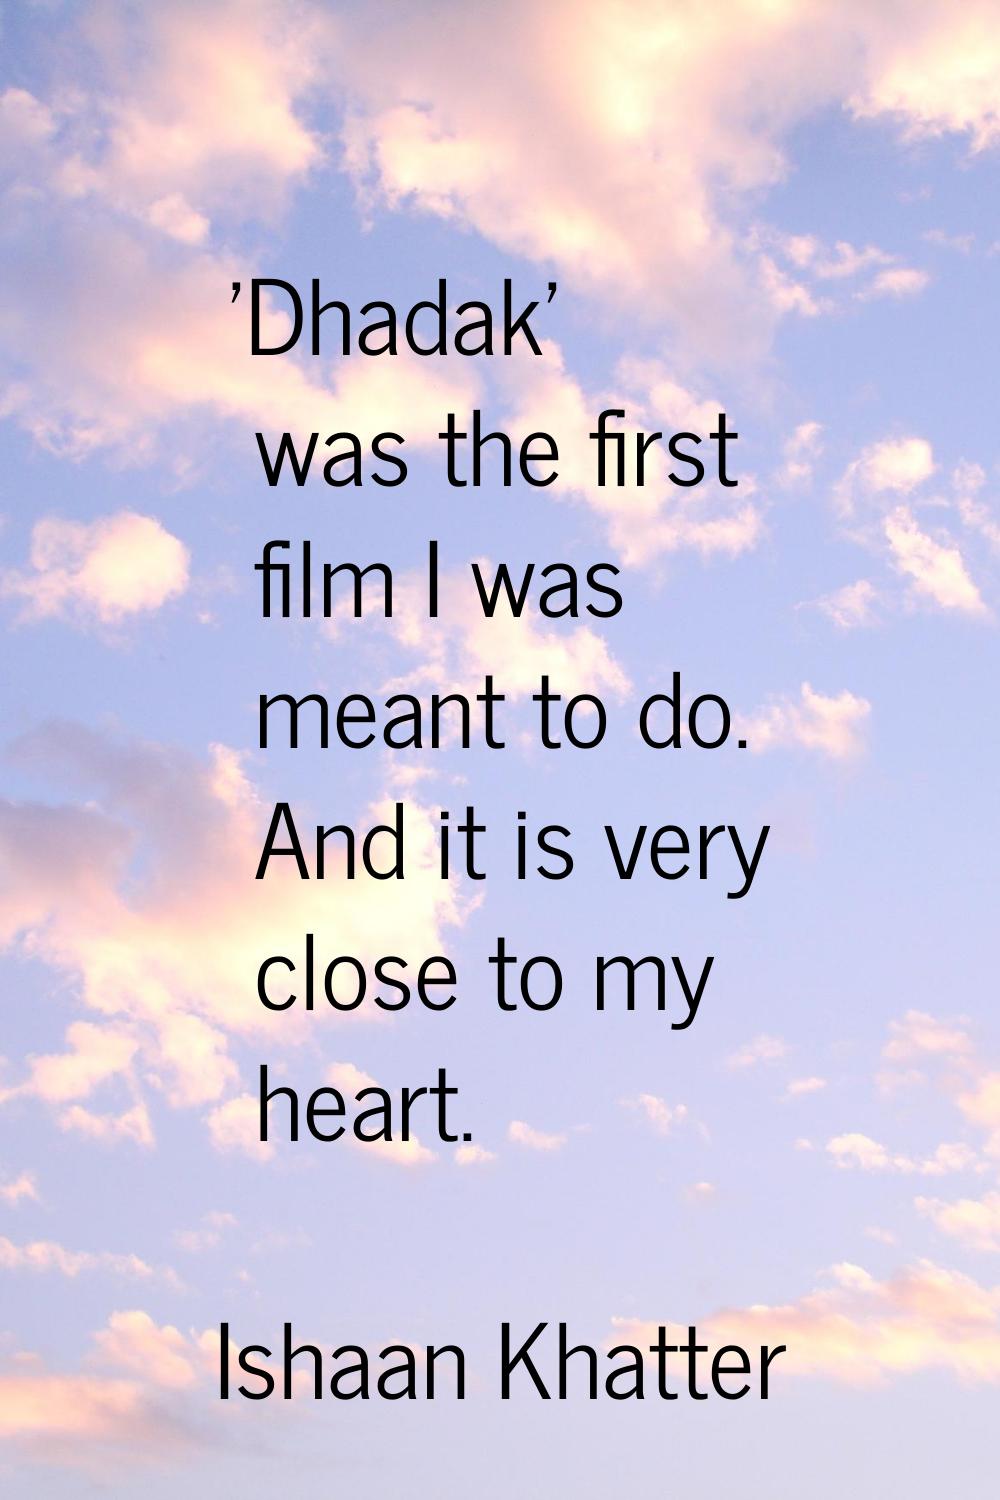 'Dhadak' was the first film I was meant to do. And it is very close to my heart.